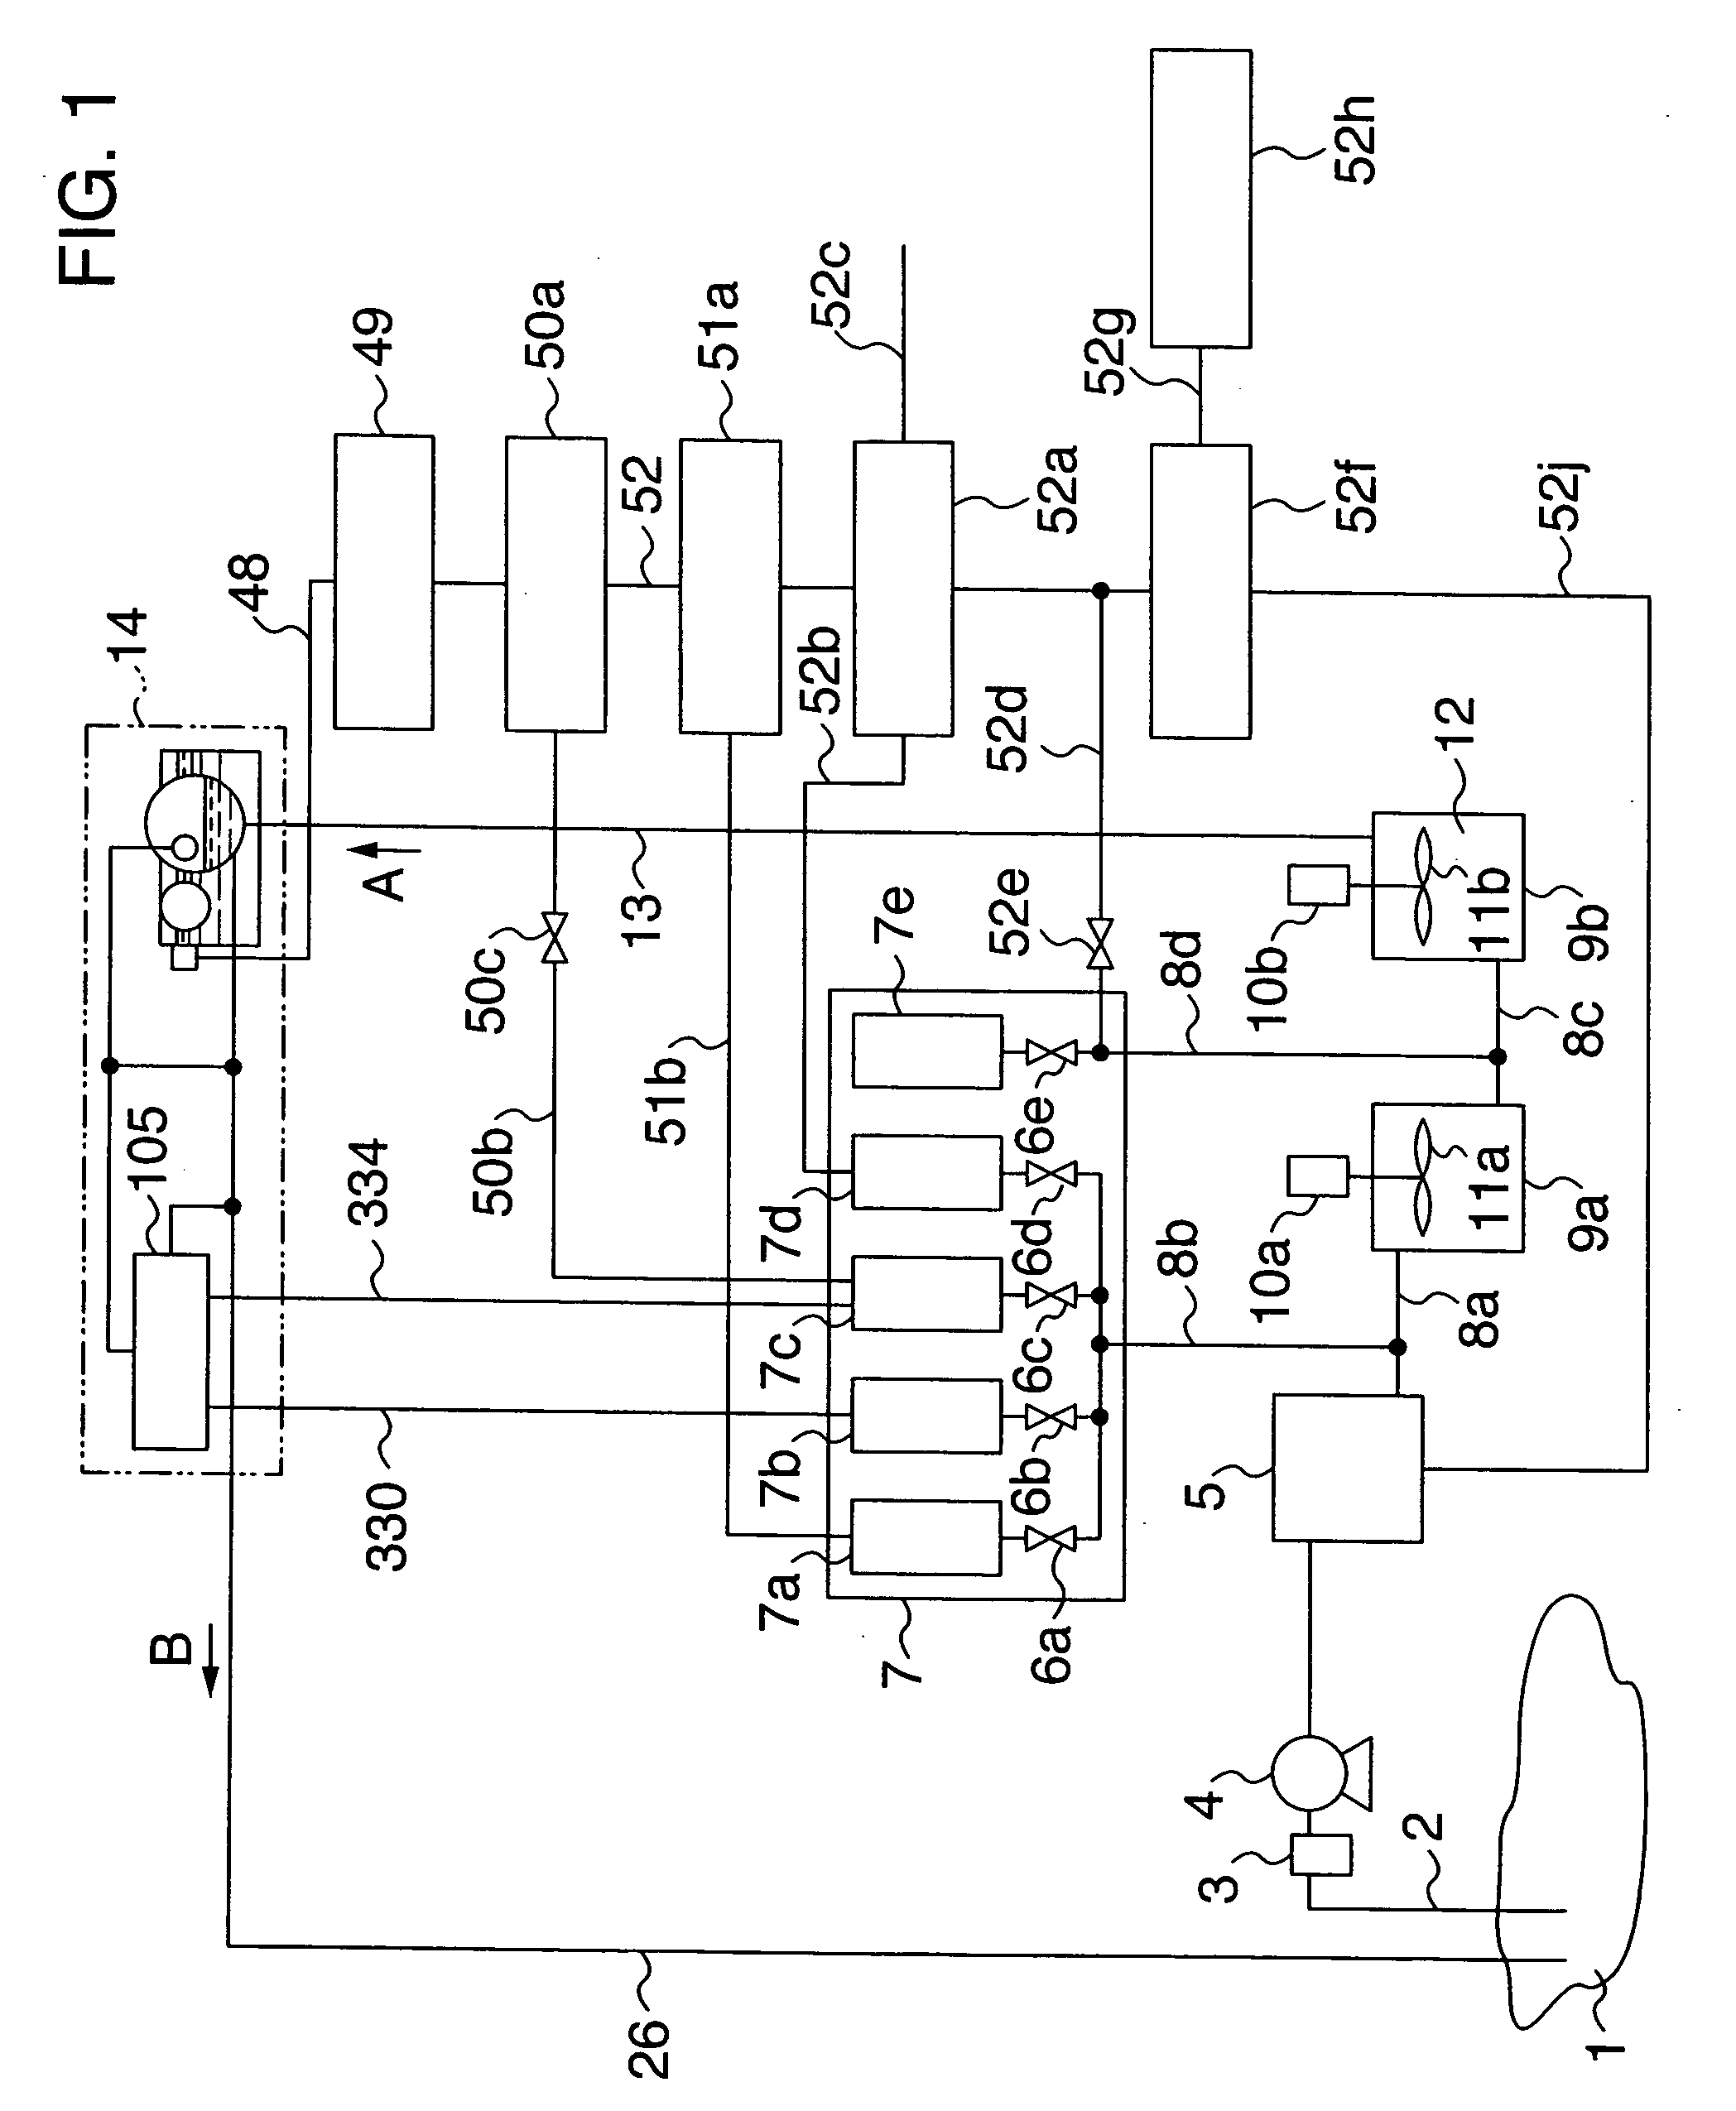 Waste water purification apparatus and waste water purification method including the regeneration of used coagulant